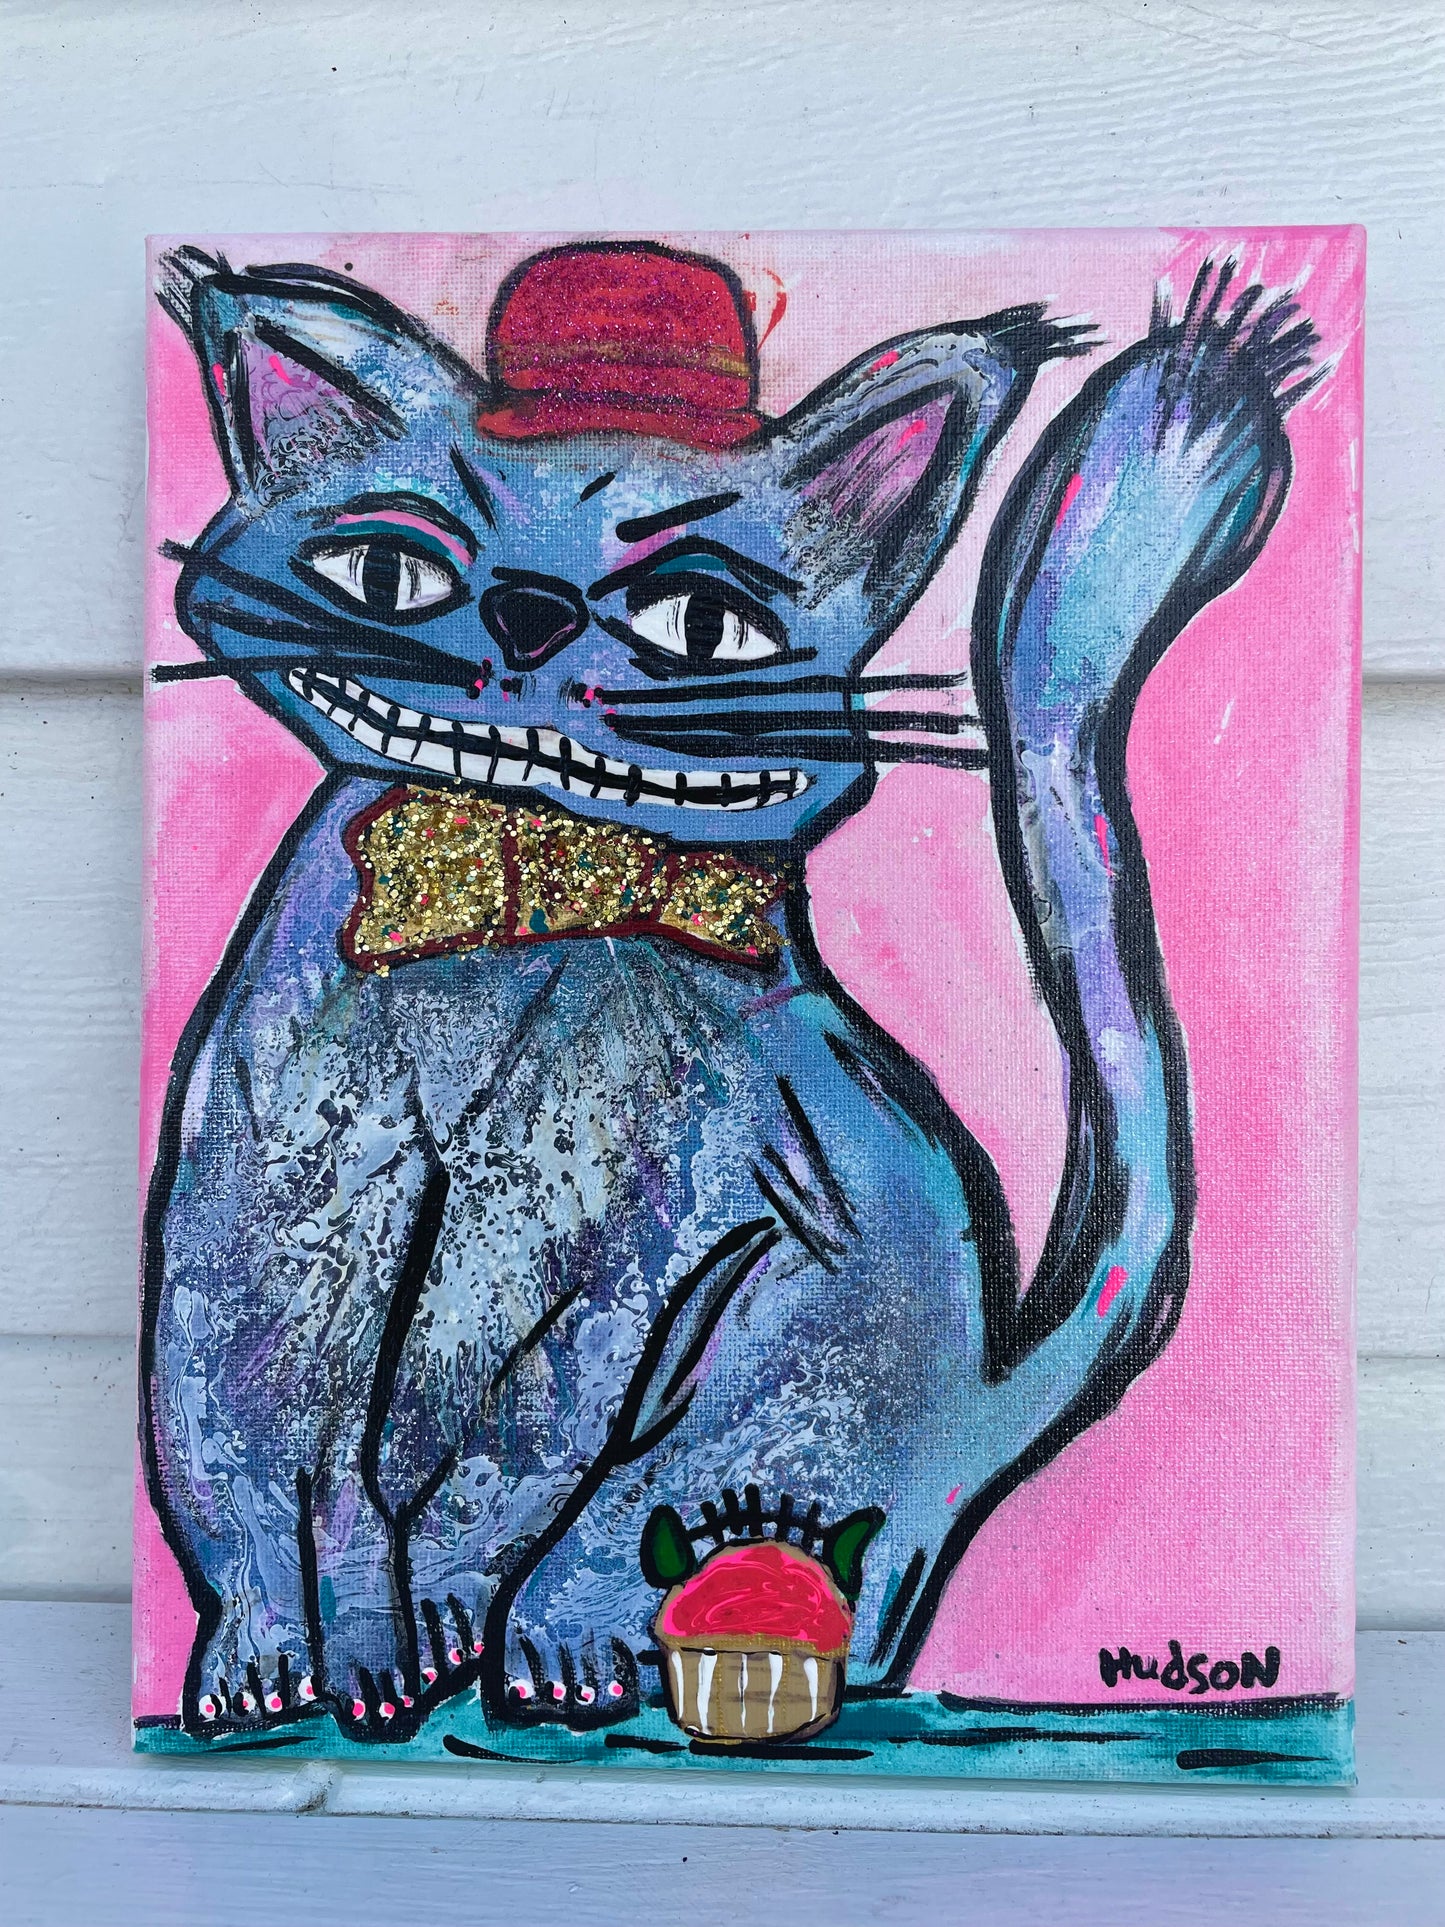 ‘BLUE CAT IN A PINK HAT’ 8x10 Ryan Hudson Painting